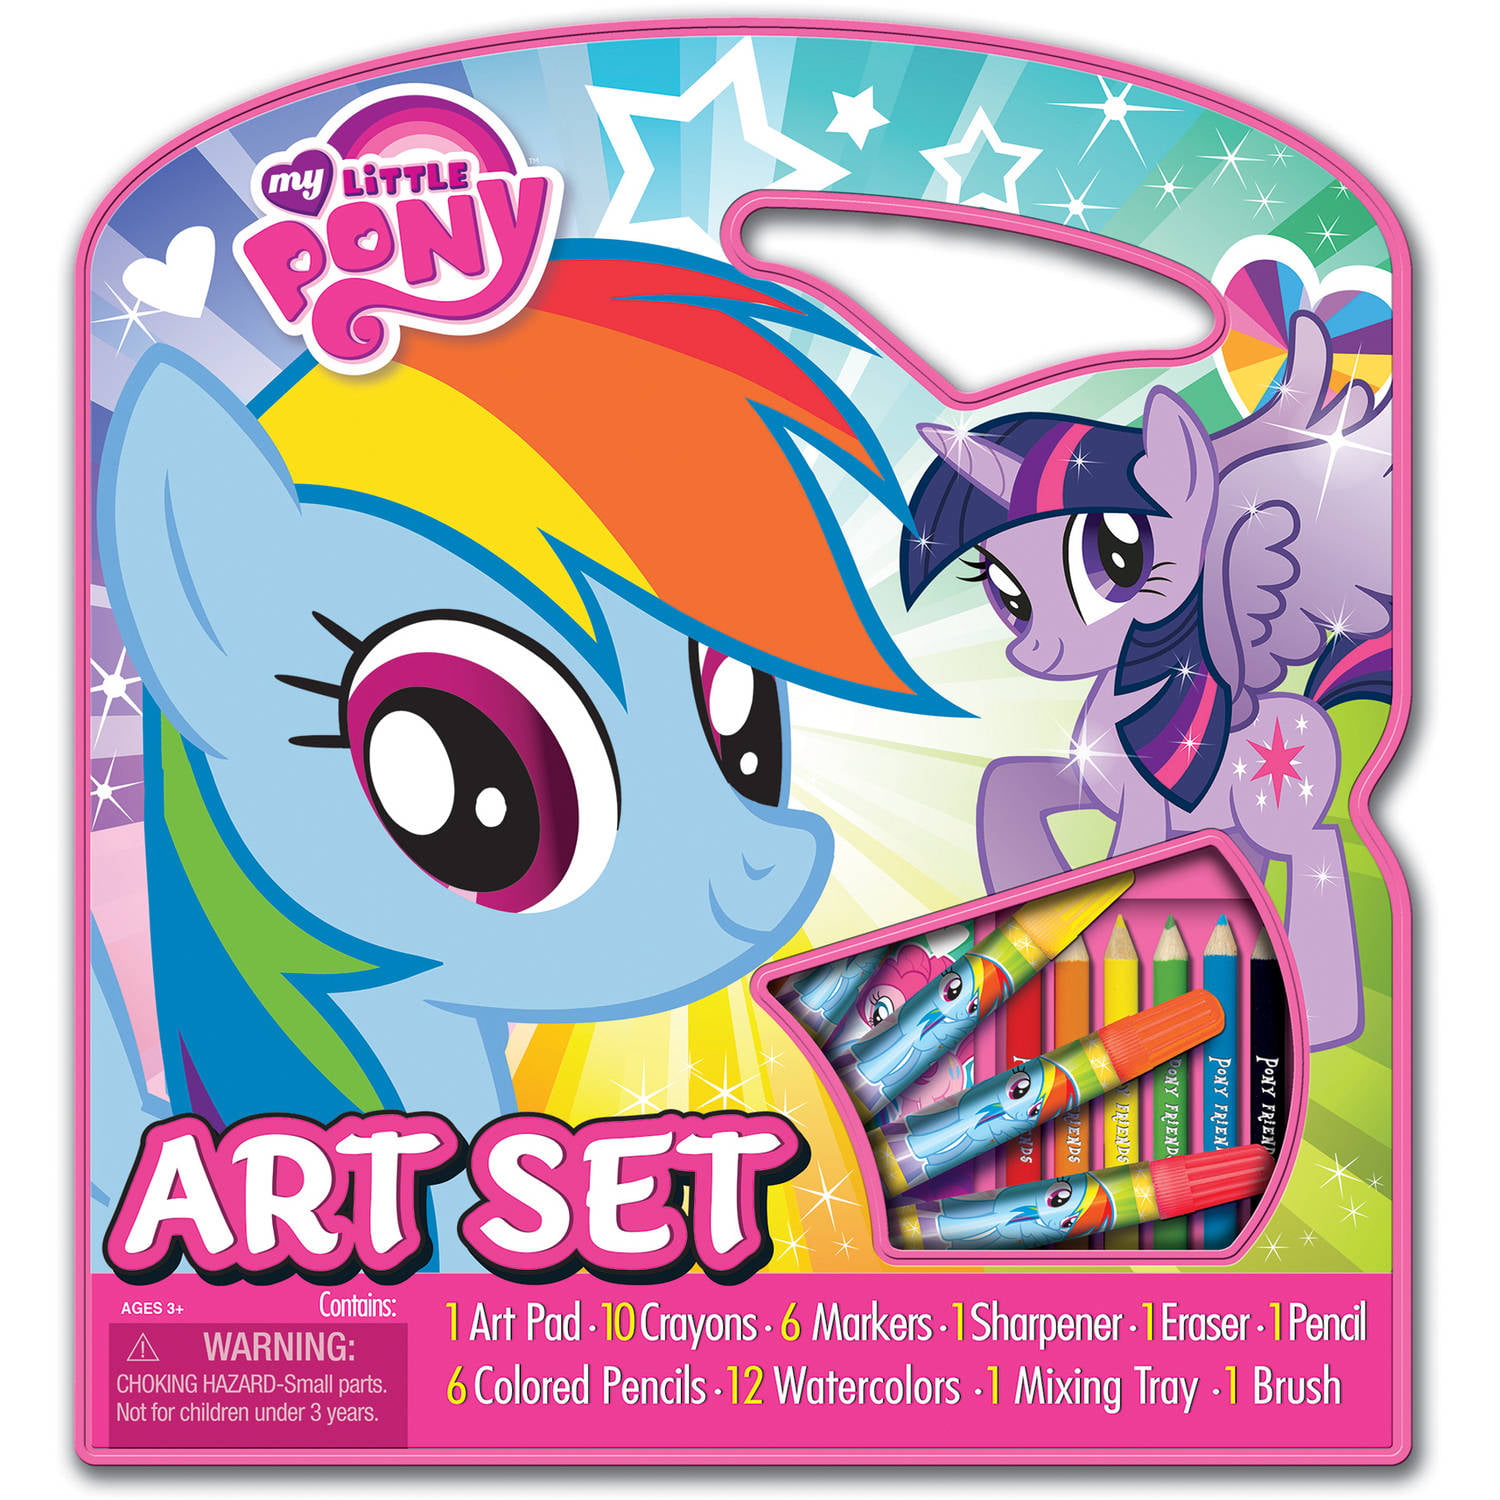 My Little Pony Pop out Friends 4 Crayons 2 Ponys Childrens Arts Crafts UK for sale online 